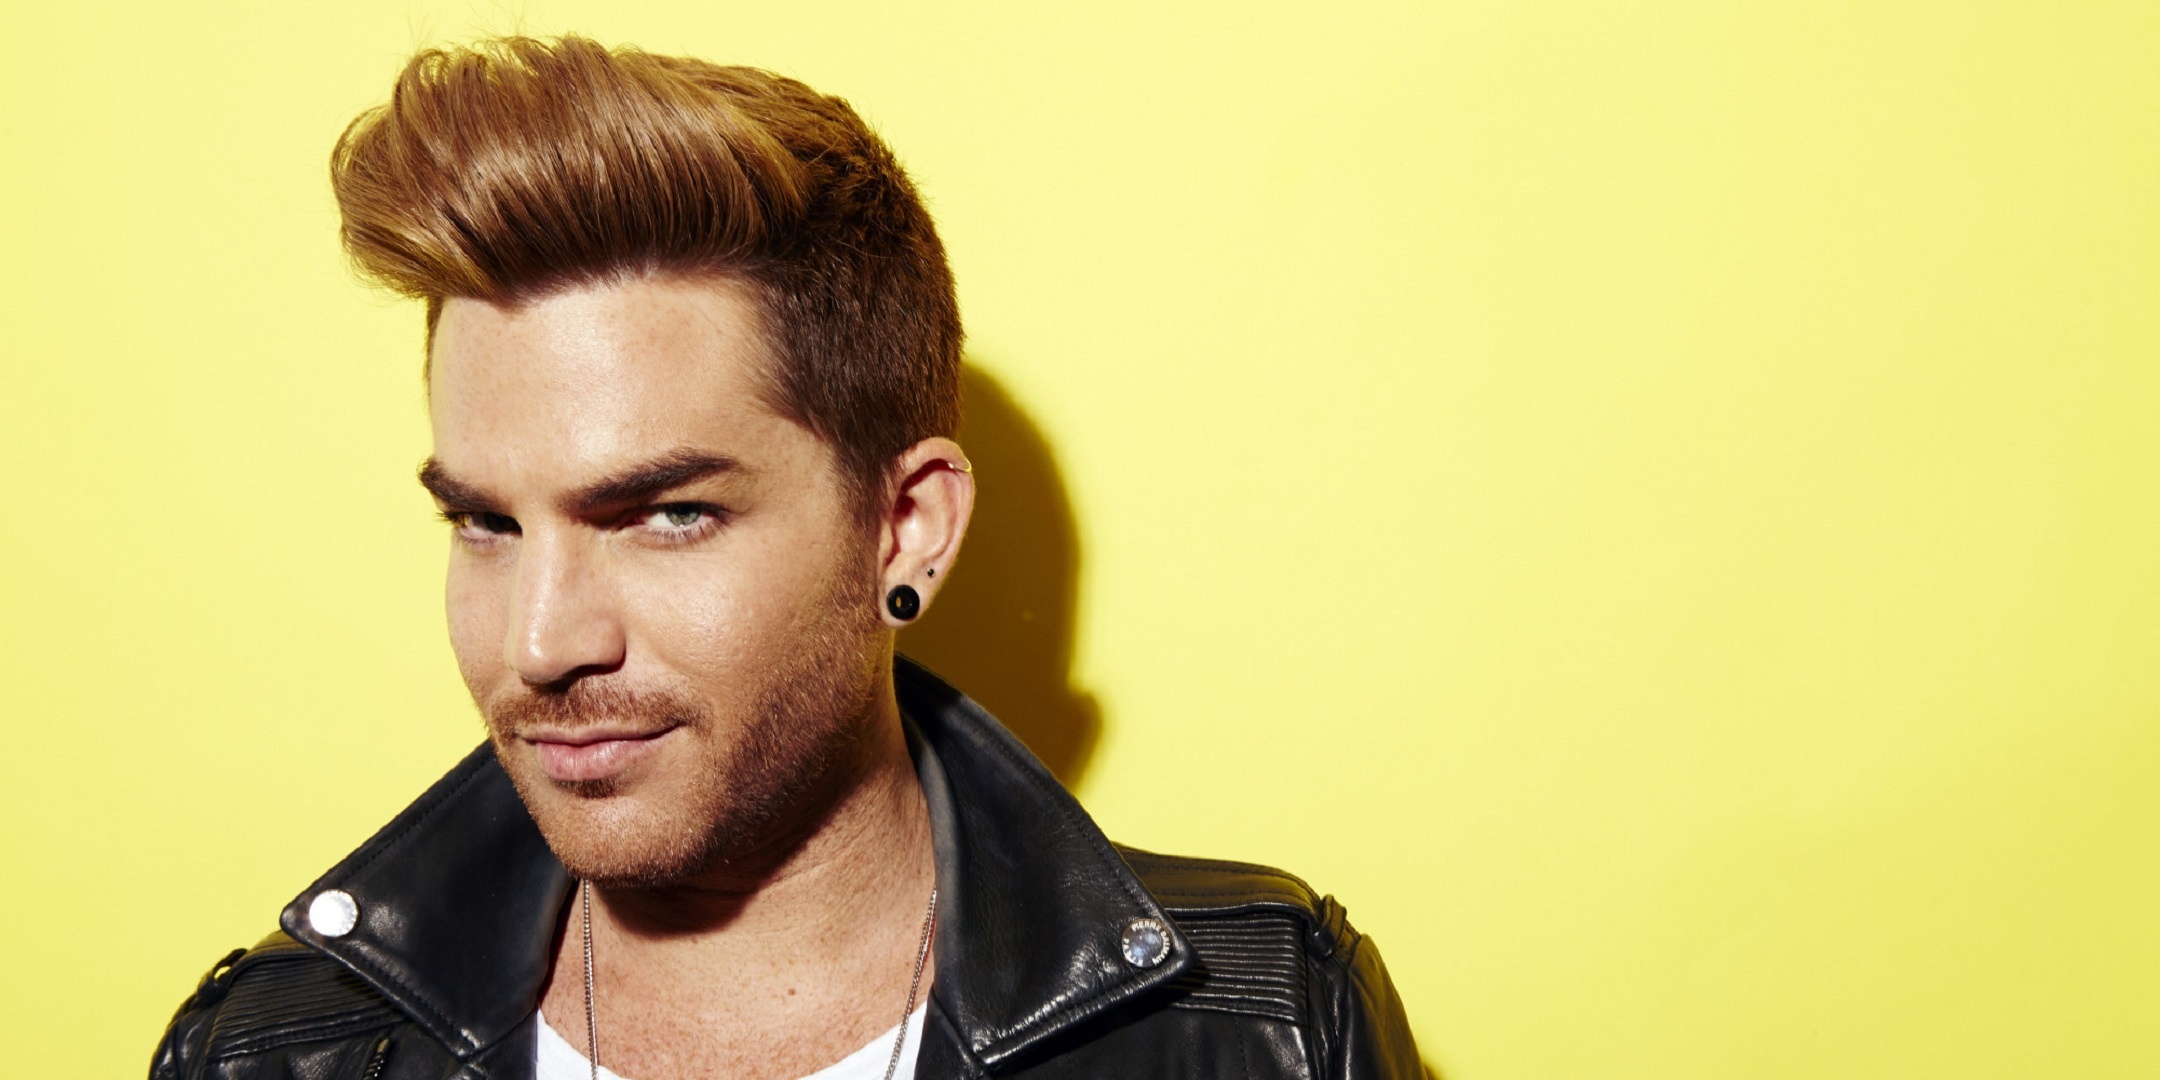 Adam Lambert: "Never Close Our Eyes" was released as the second single on April 14, 2012. 2160x1080 Dual Screen Wallpaper.